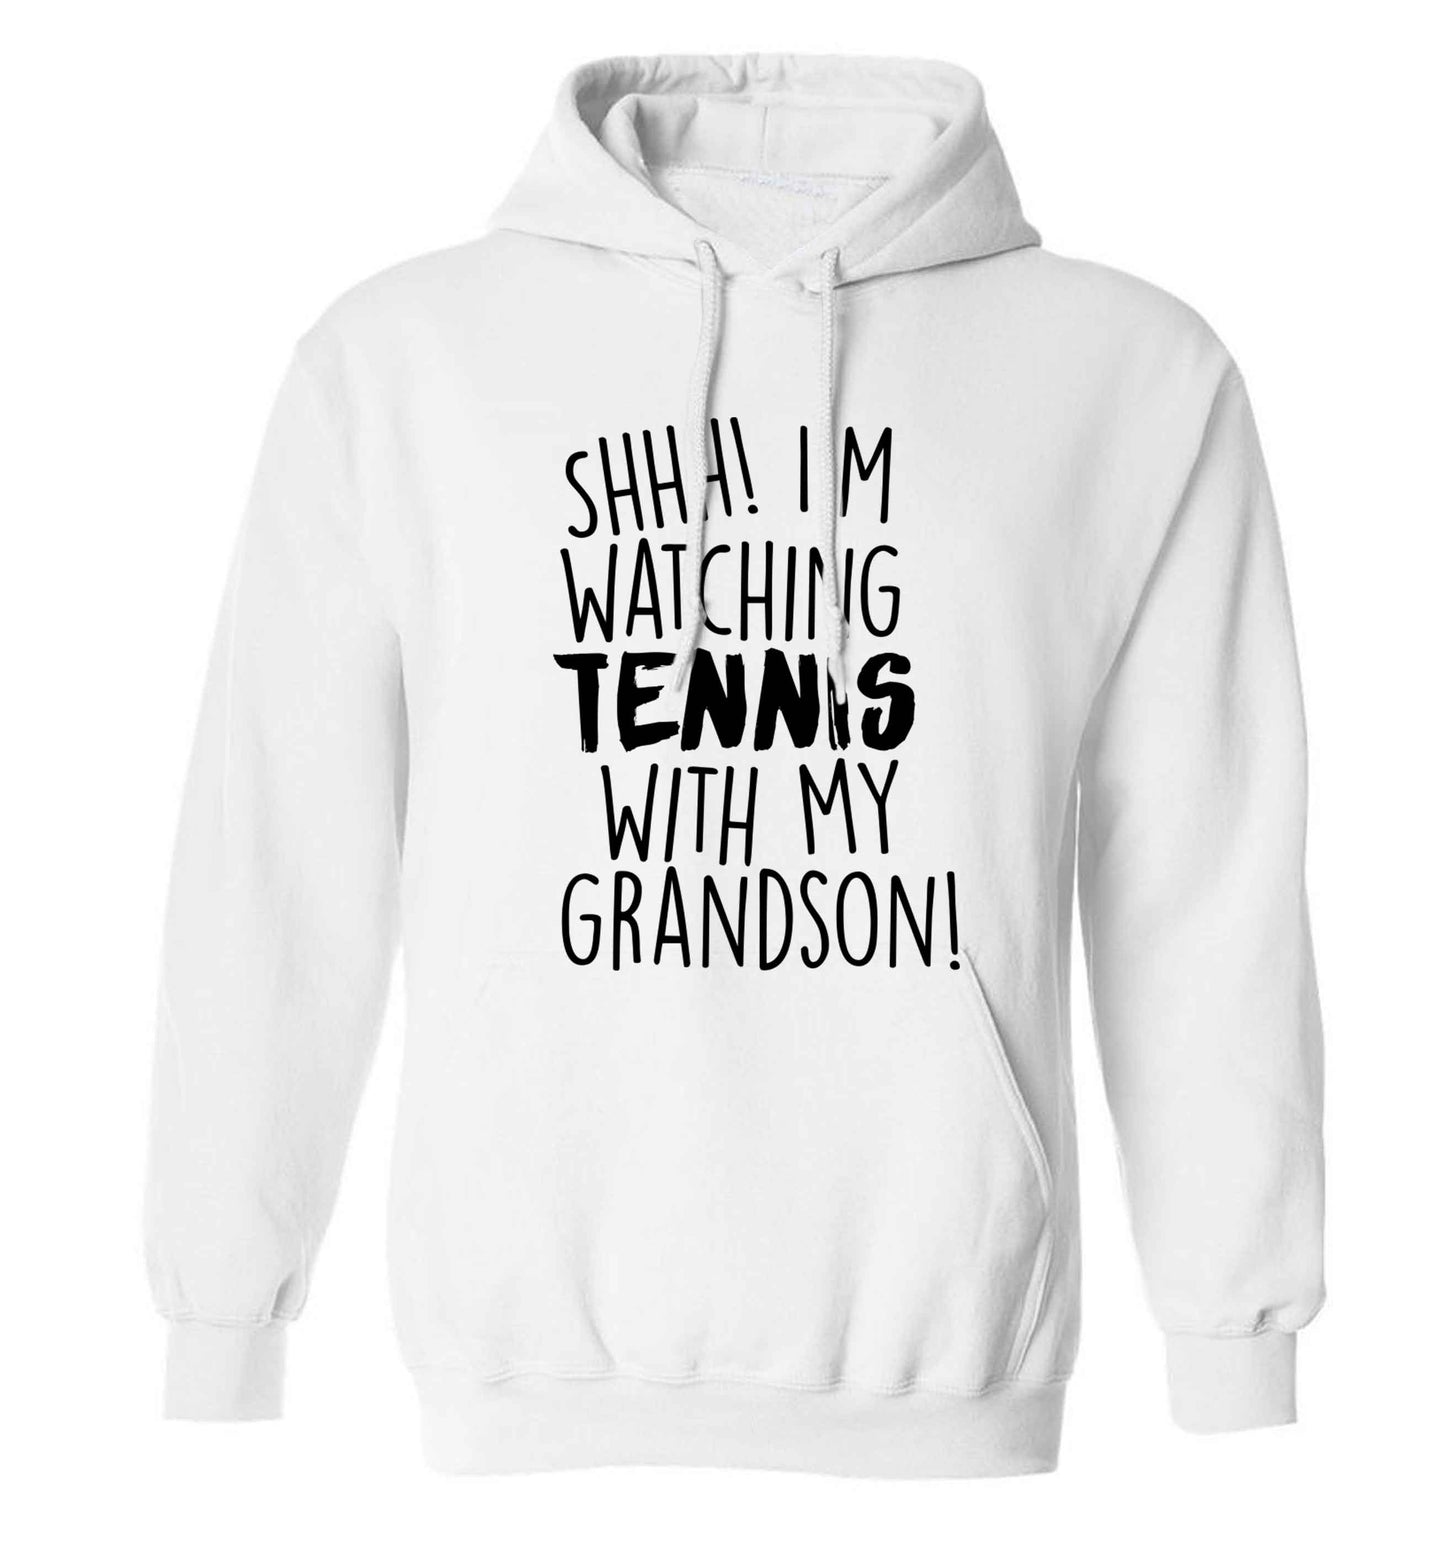 Shh! I'm watching tennis with my grandson! adults unisex white hoodie 2XL